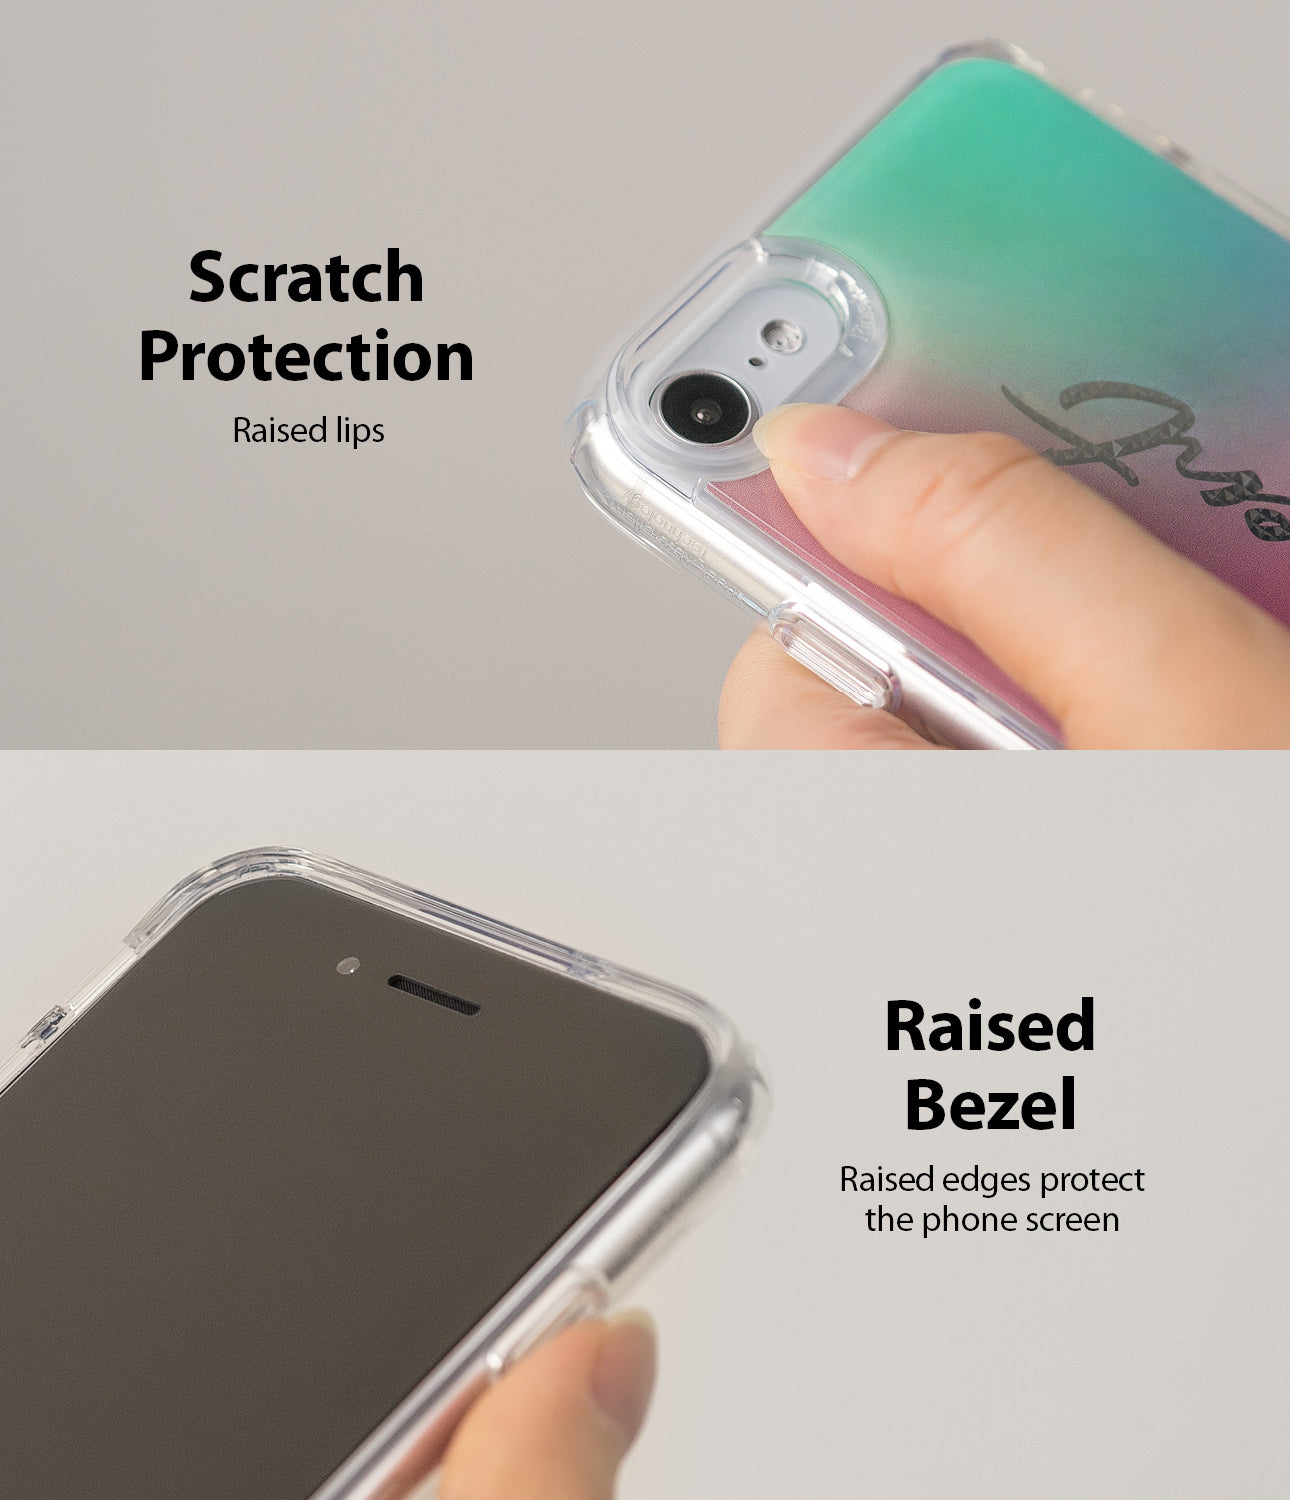 scratch protection raised lips with raised bezel and edges prtoect the phone screen